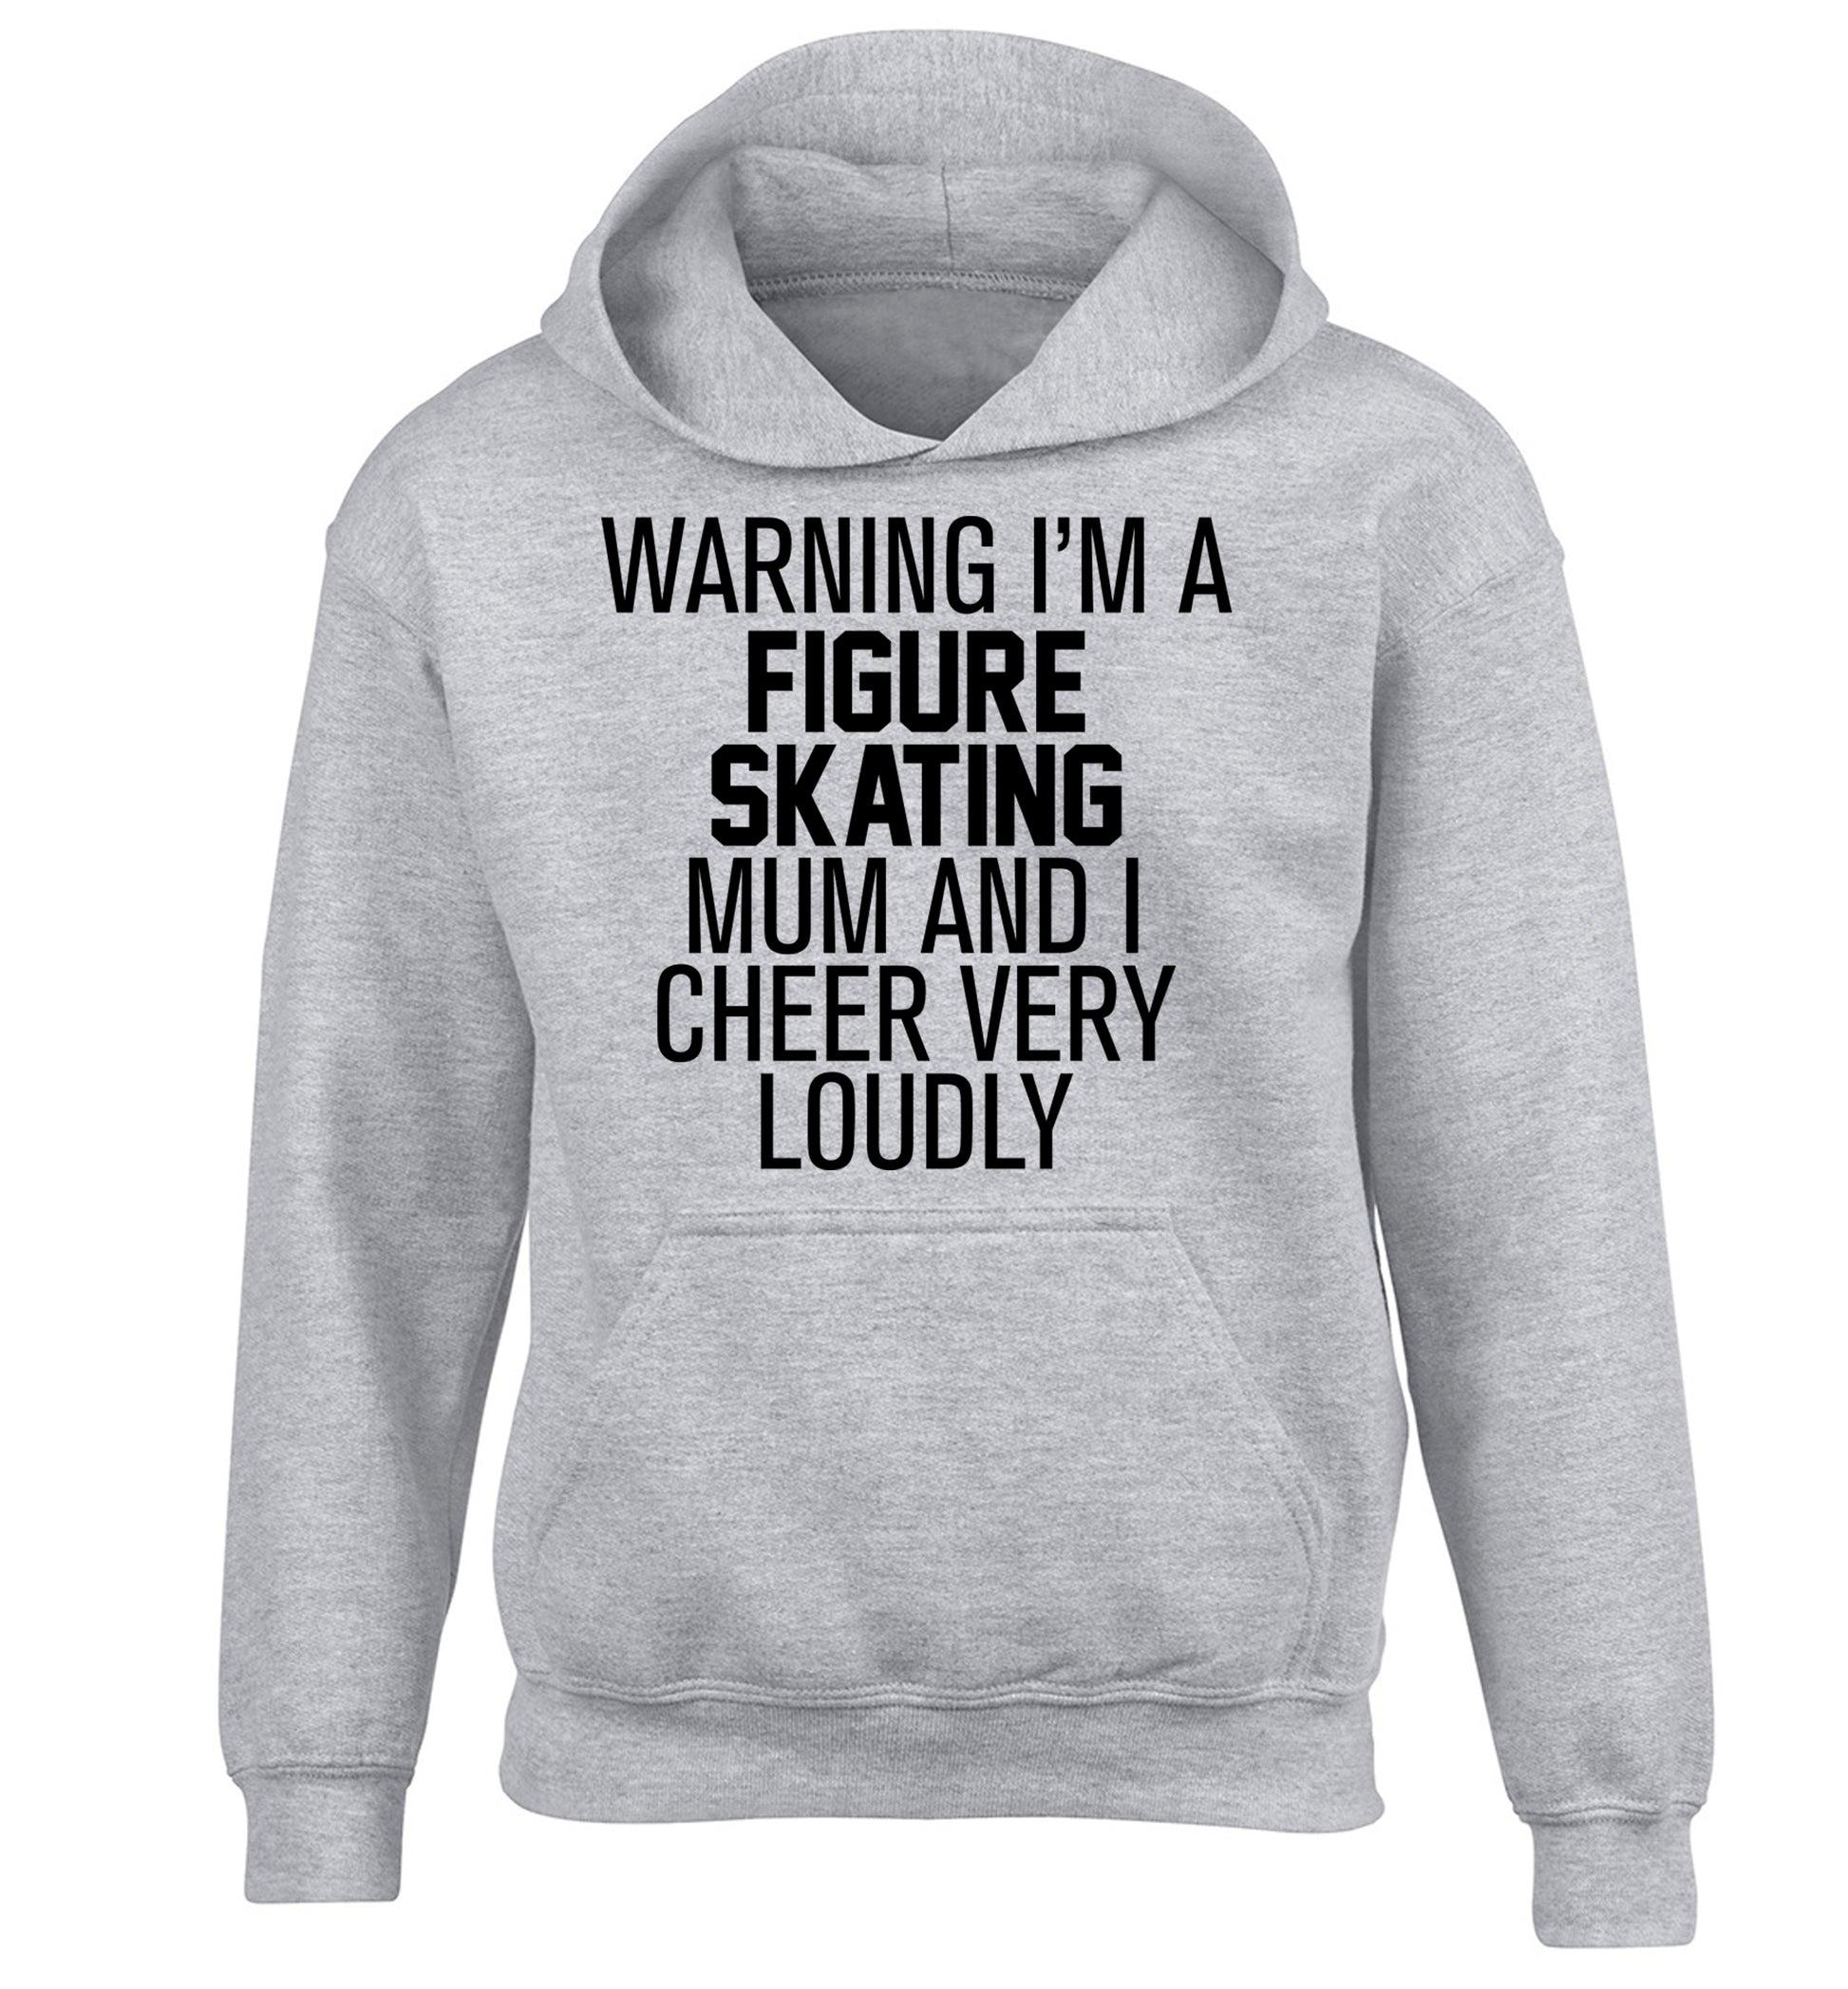 Warning I'm a figure skating mum and I cheer very loudly children's grey hoodie 12-14 Years